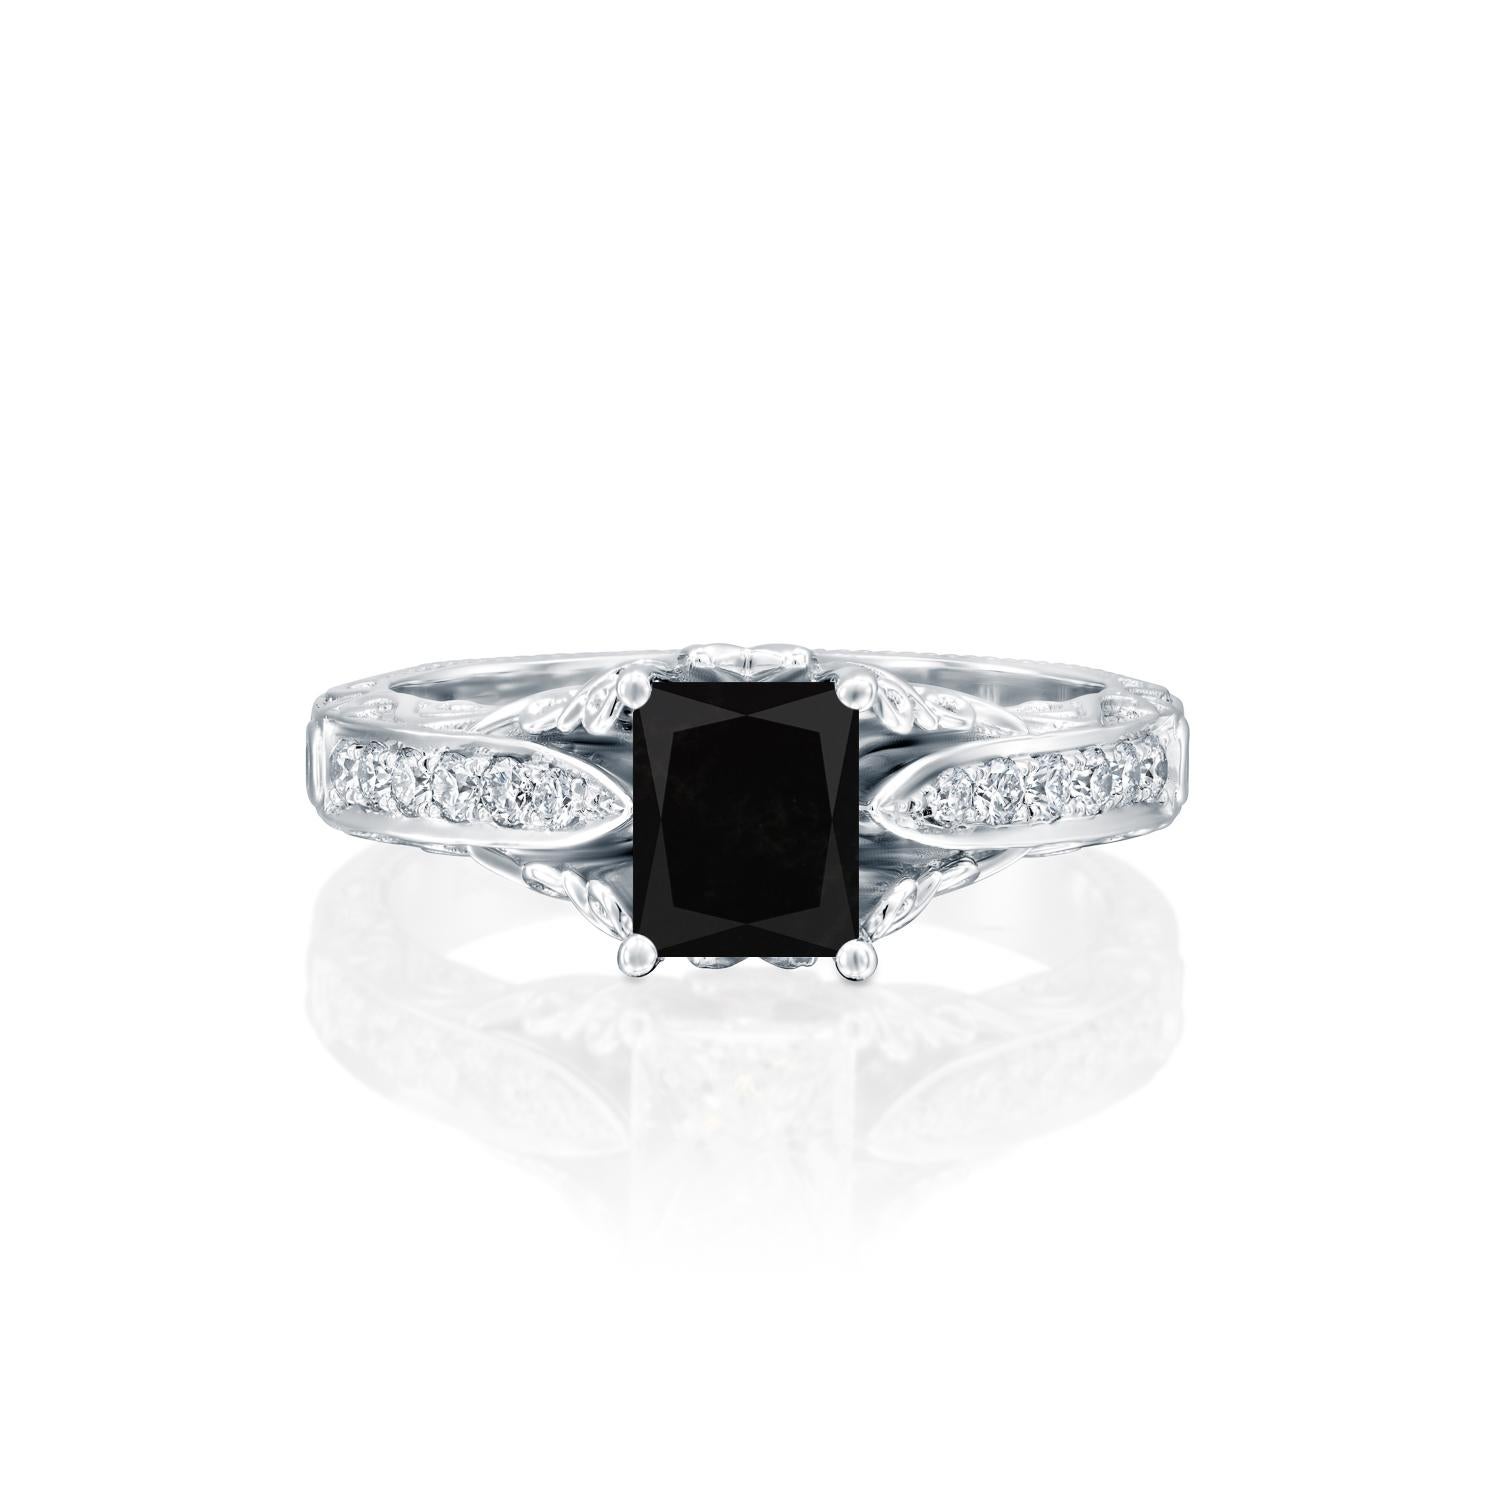 Beautiful solitaire with accents vintage style diamond engagement ring. Center stone is natural, radiant shaped, AAA quality Black Diamond of 2 carat and it is surrounded by smaller natural diamonds approx. 0.25 total carat weight. The total carat